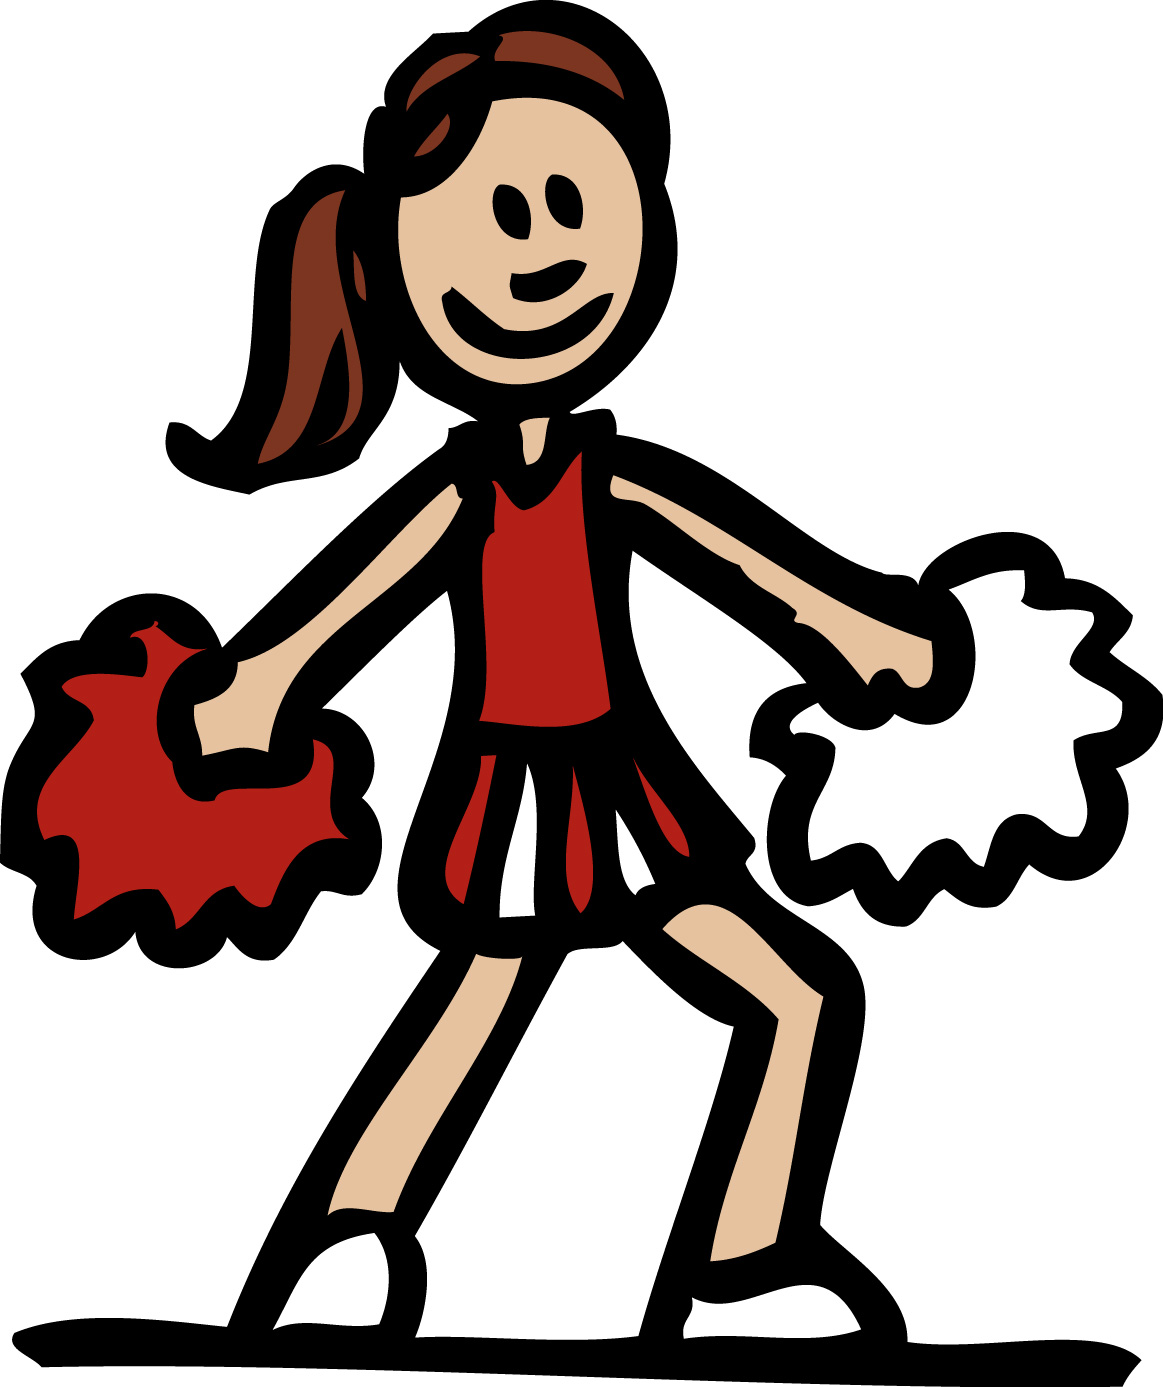 Cheerleaders Seem Like They Would Be A Popular Image But The Ones I